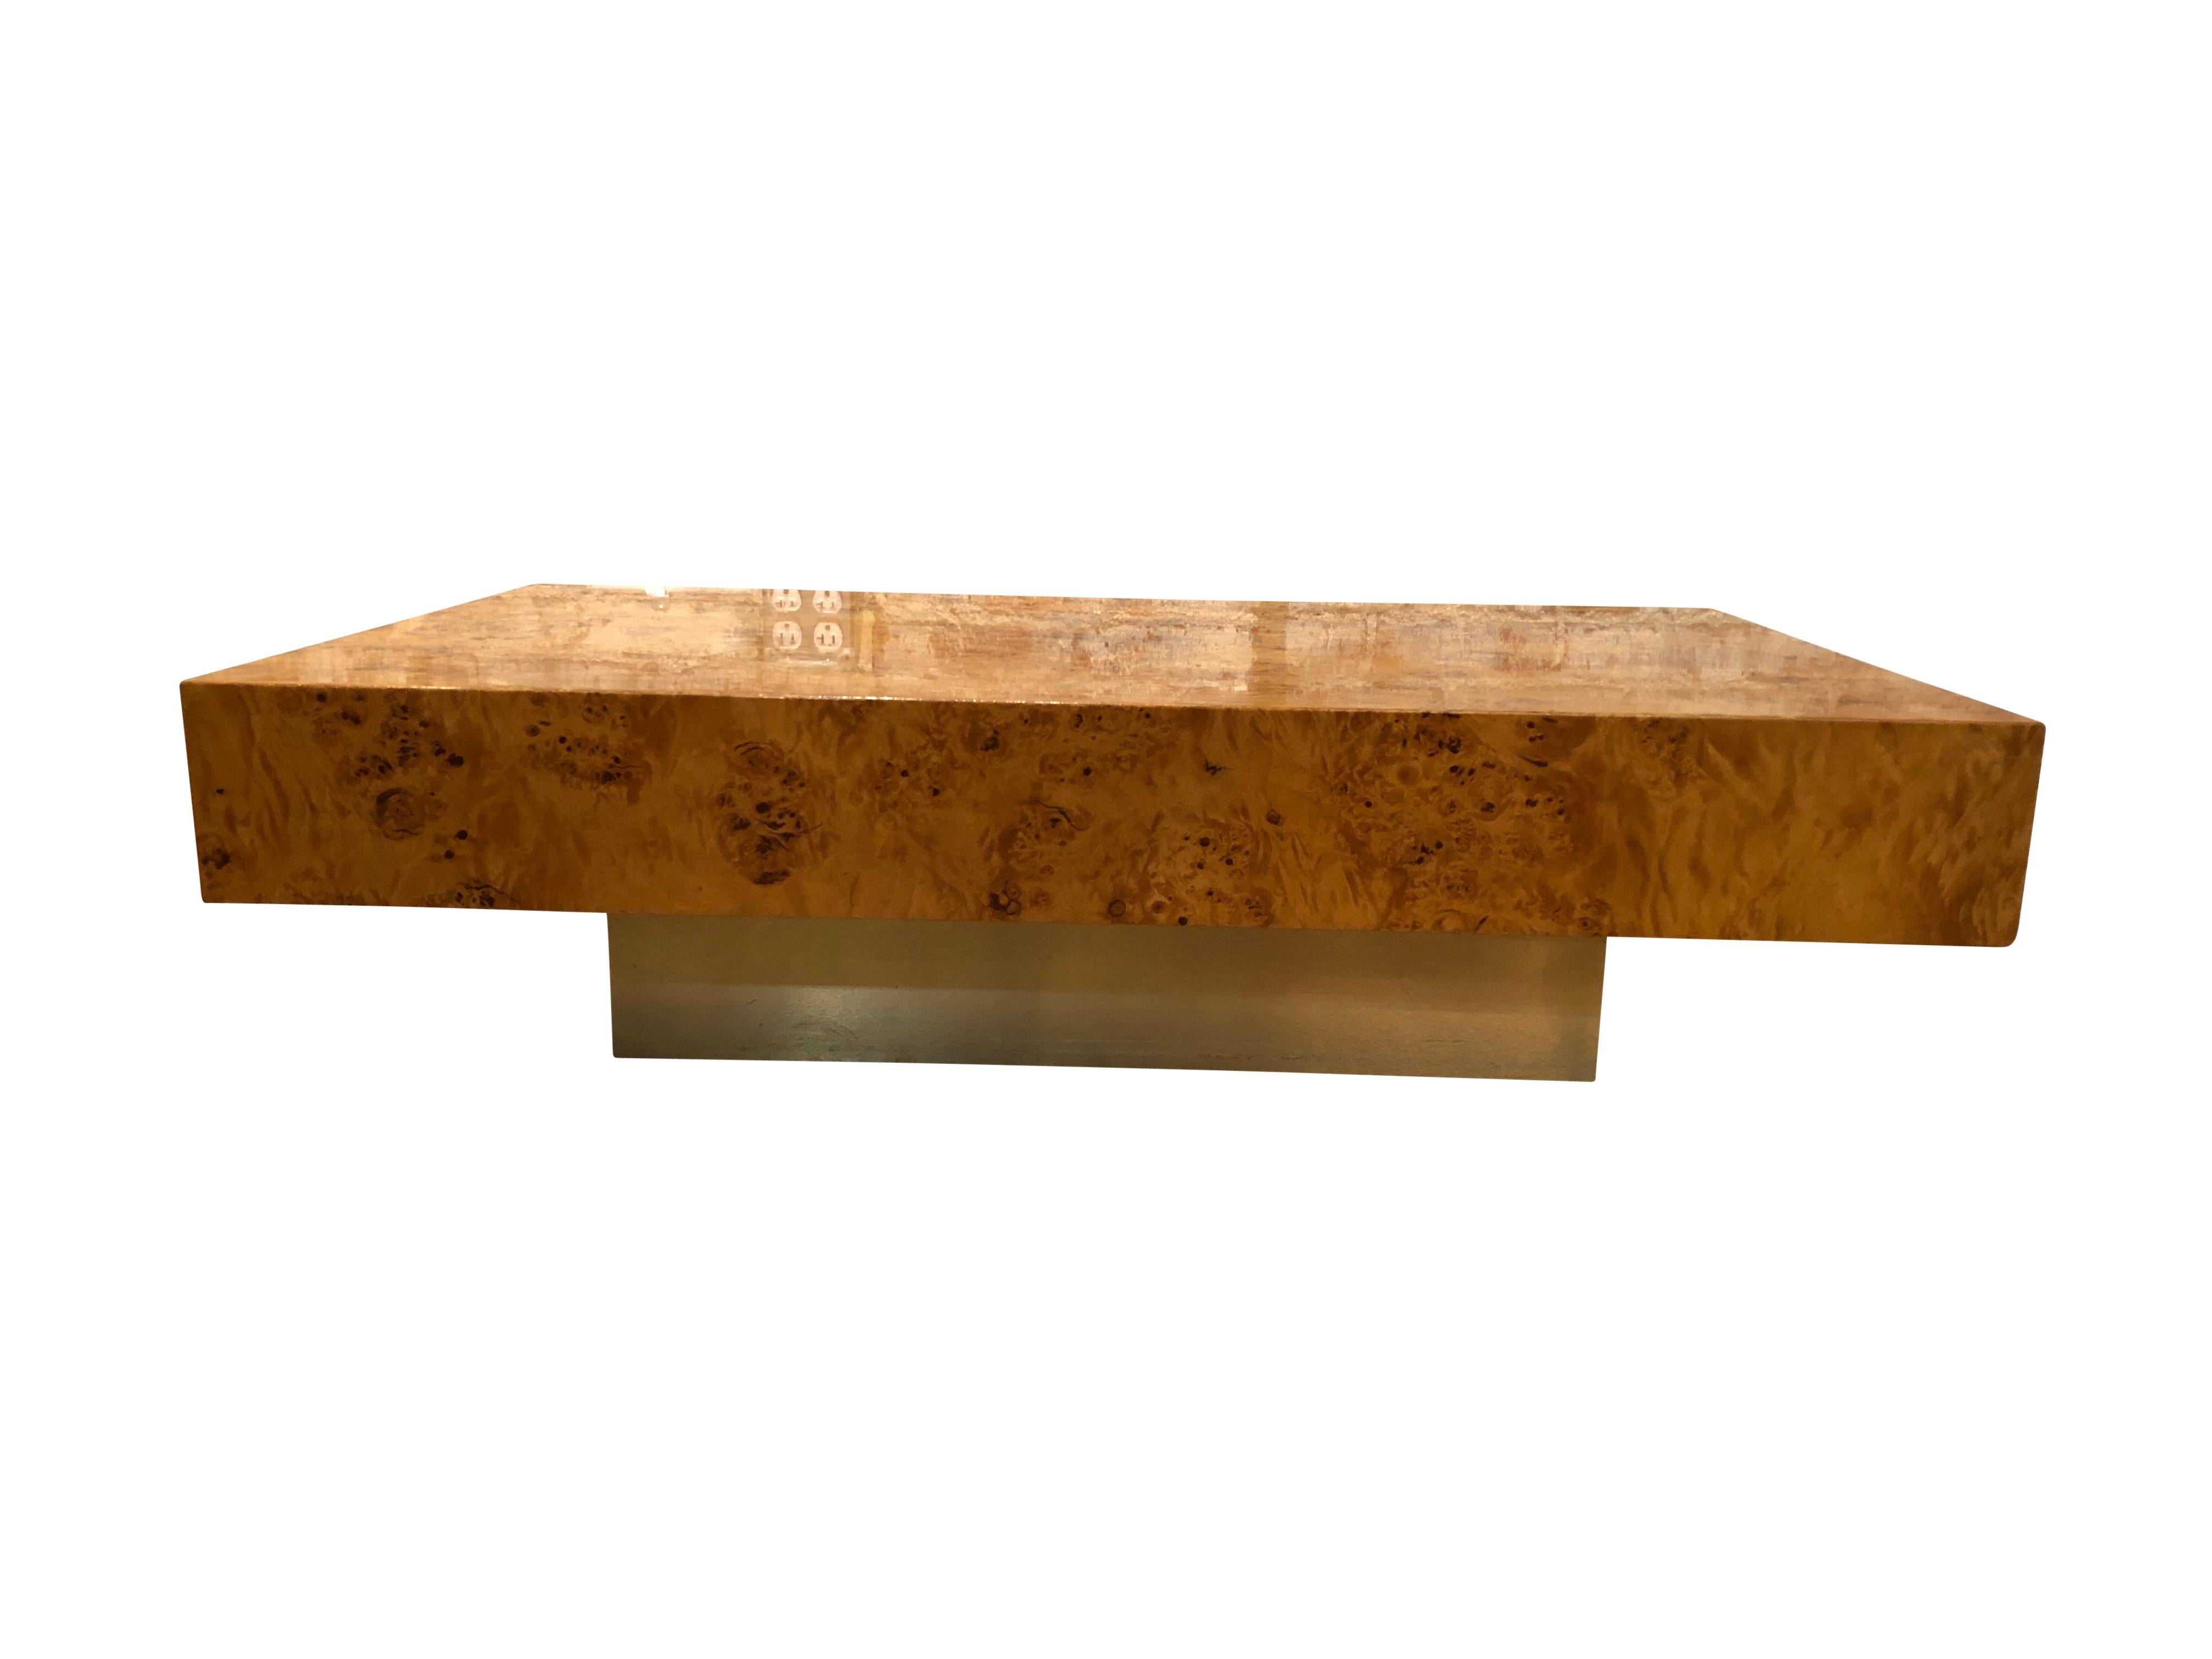 An attractive vintage French burl wood coffee table made by Christofle Paris.

Paris, circa 1975.

Made with fine burl wood and sits in excellent condition.

Provenance: Purchased at the Christofle Store in Paris, France, 1975.

Having the